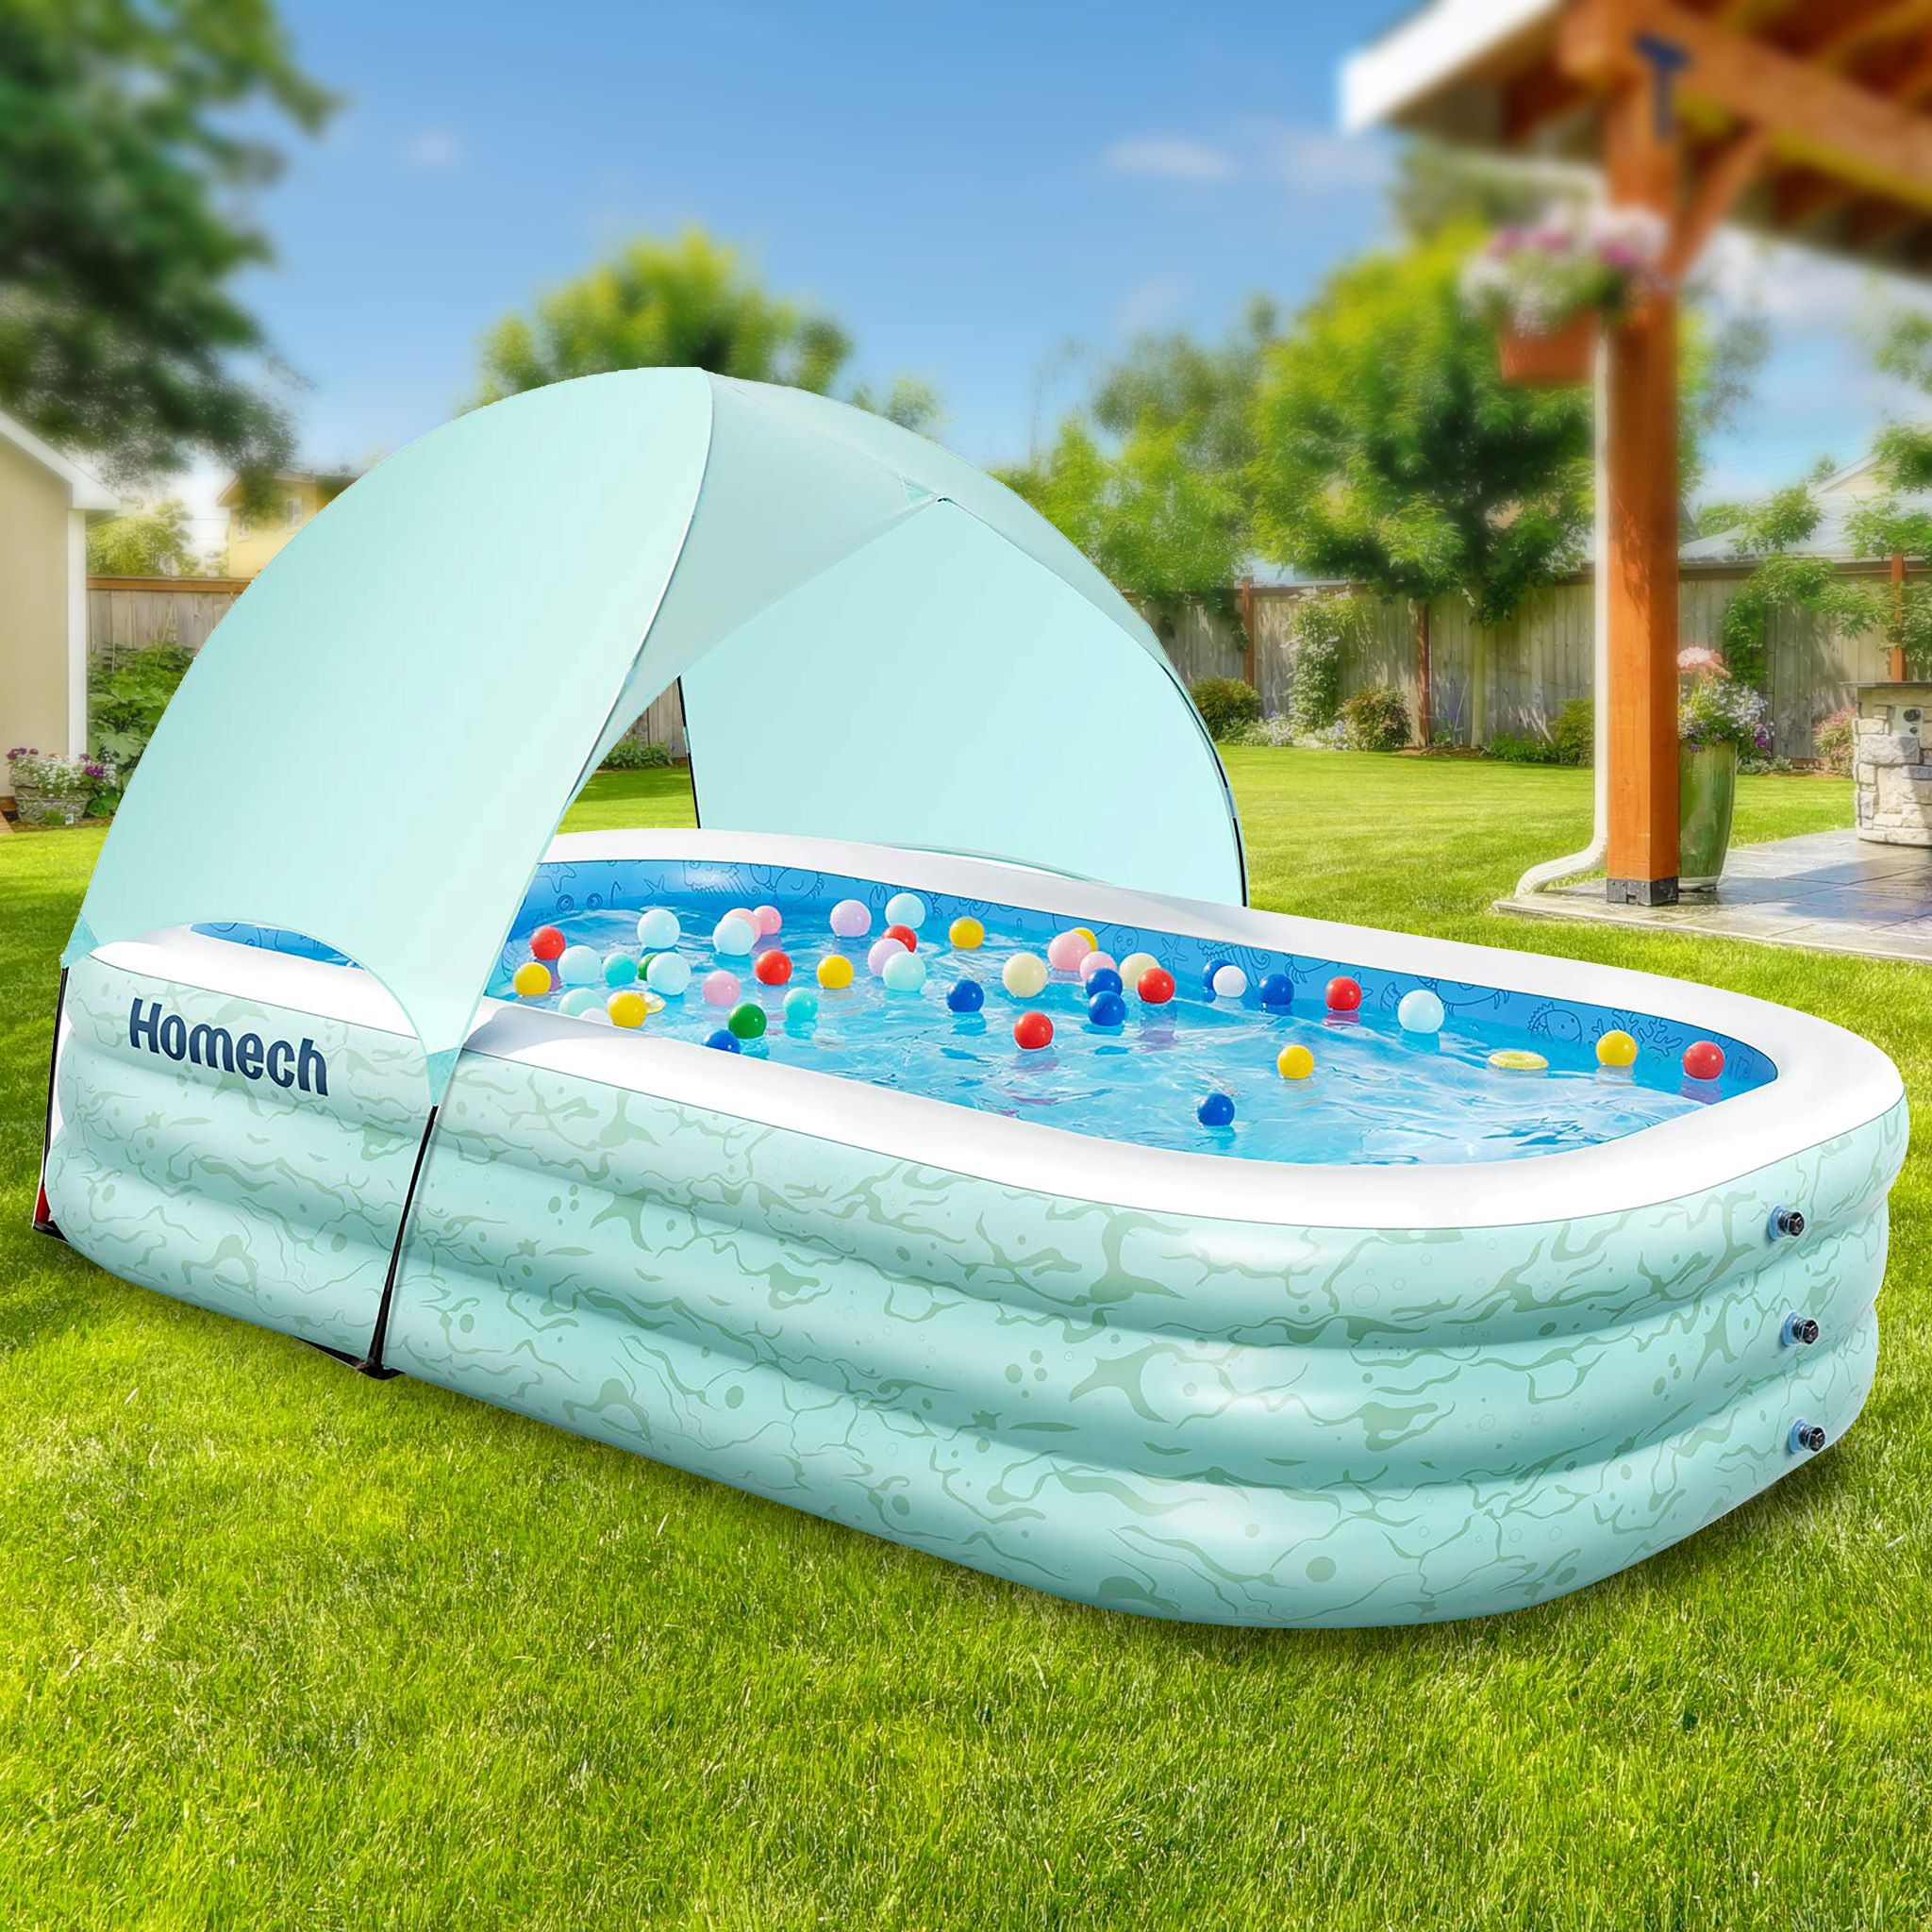 Big Pool Swimming Pool for Kids and Adults Large Pool Inflatable Pools for Adults Outdoor Pools for Backyard Above Ground Swimming Pools Clearance 12 x 36 